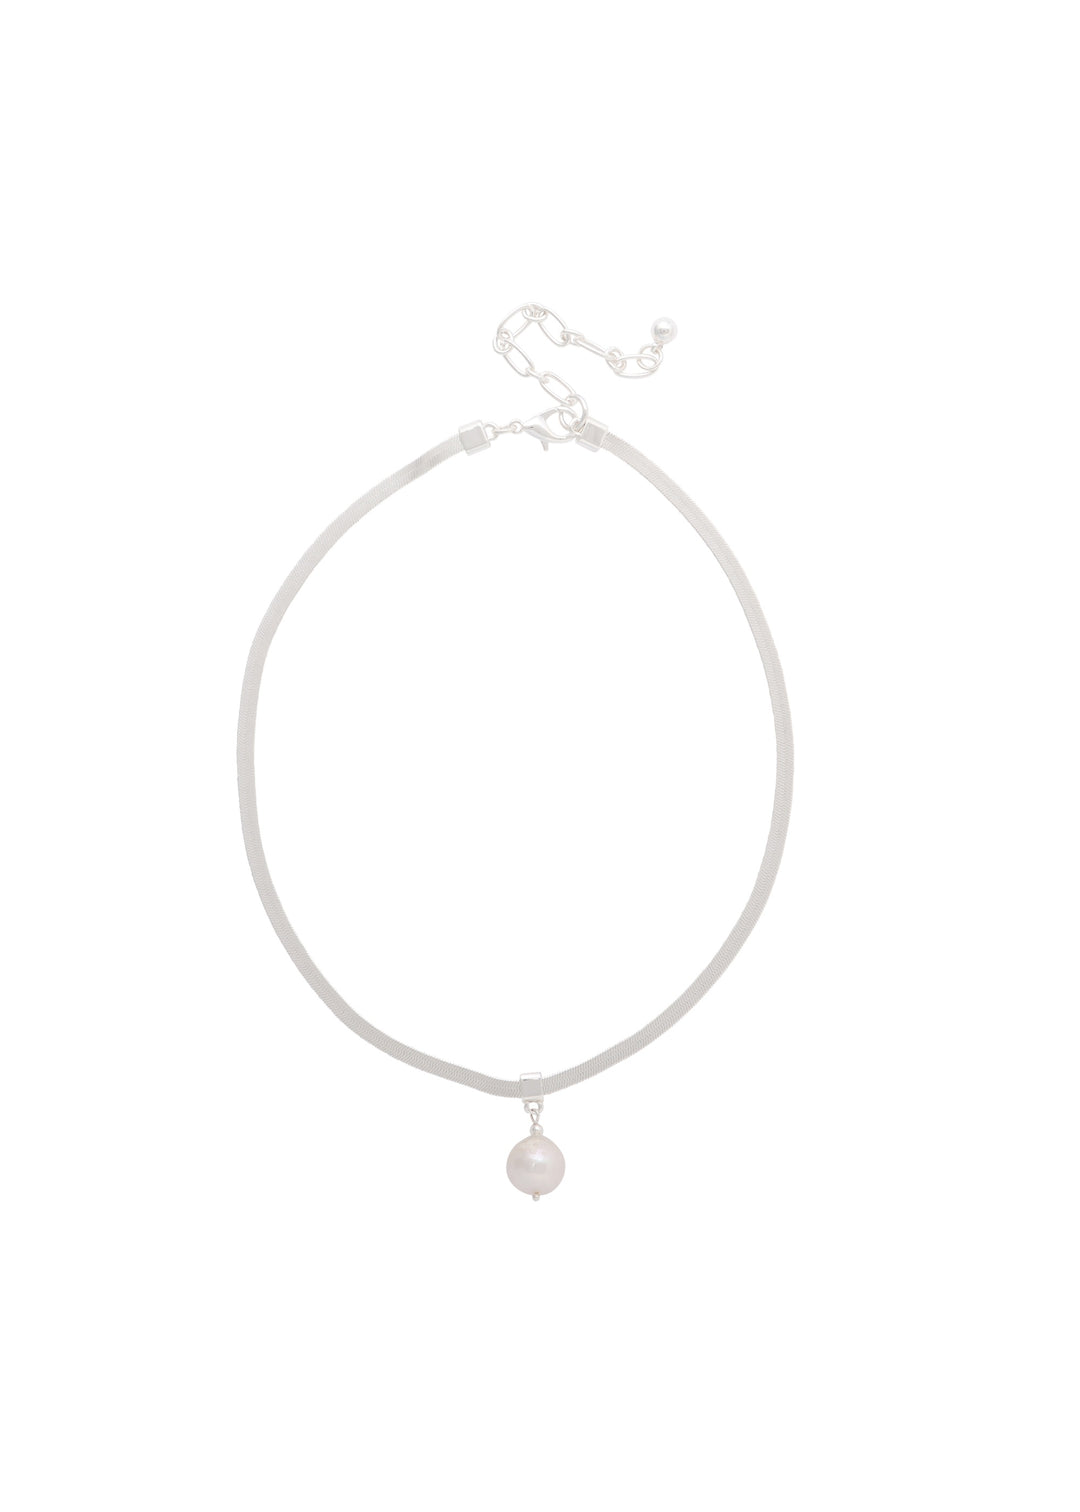 Merx - Snake Chain Pearl Necklace